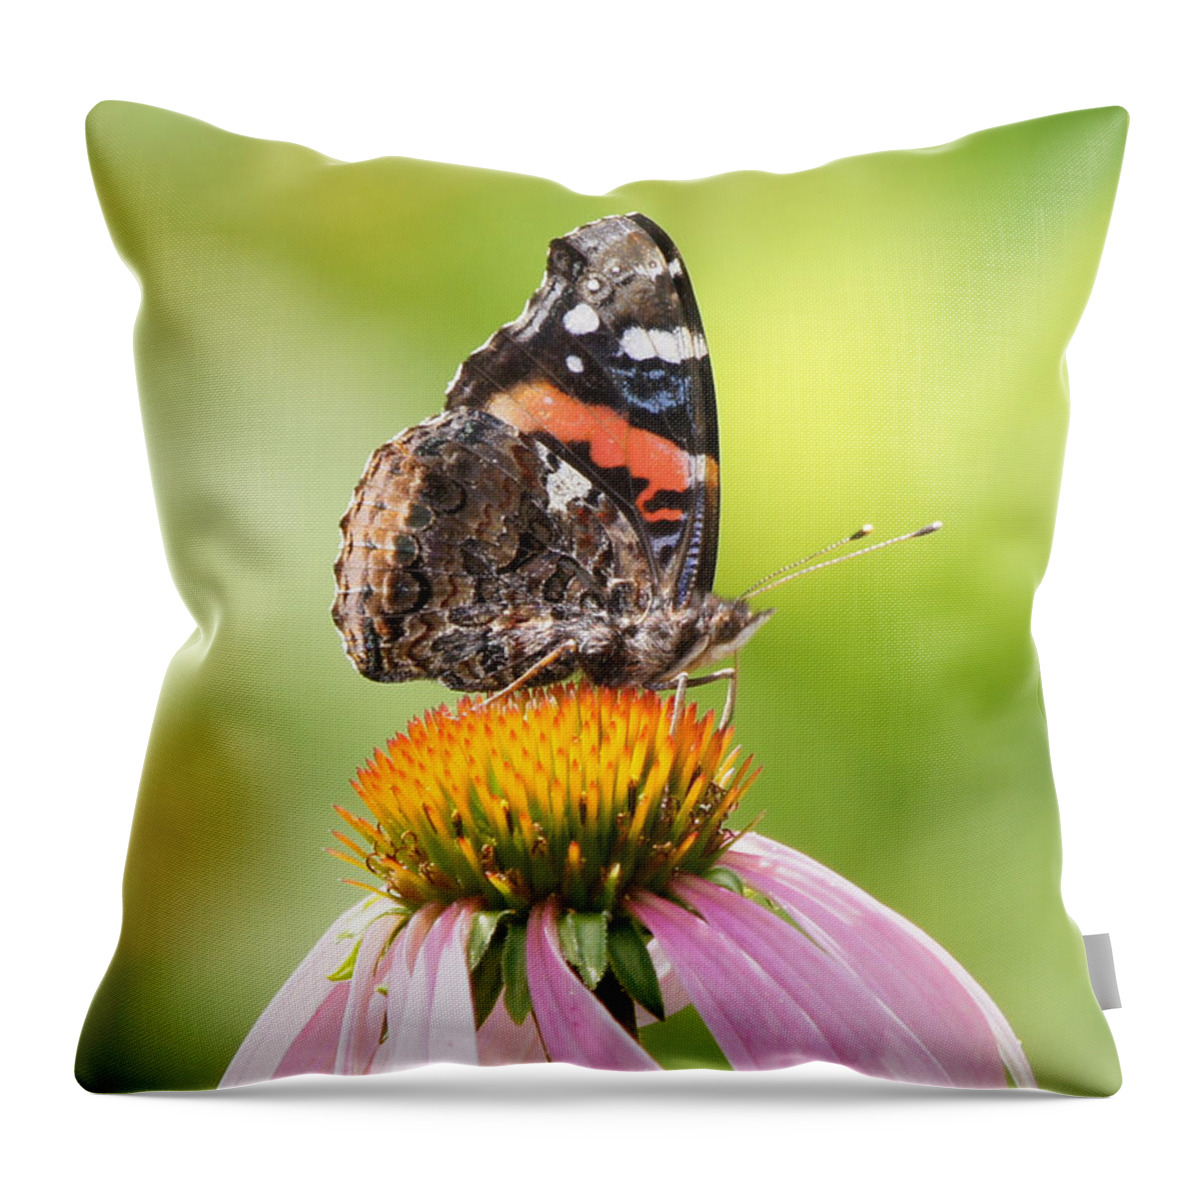 20150711-15325_v1-redadmiral Throw Pillow featuring the photograph Red Admiral Sails on Cone Flower by Robert E Alter Reflections of Infinity